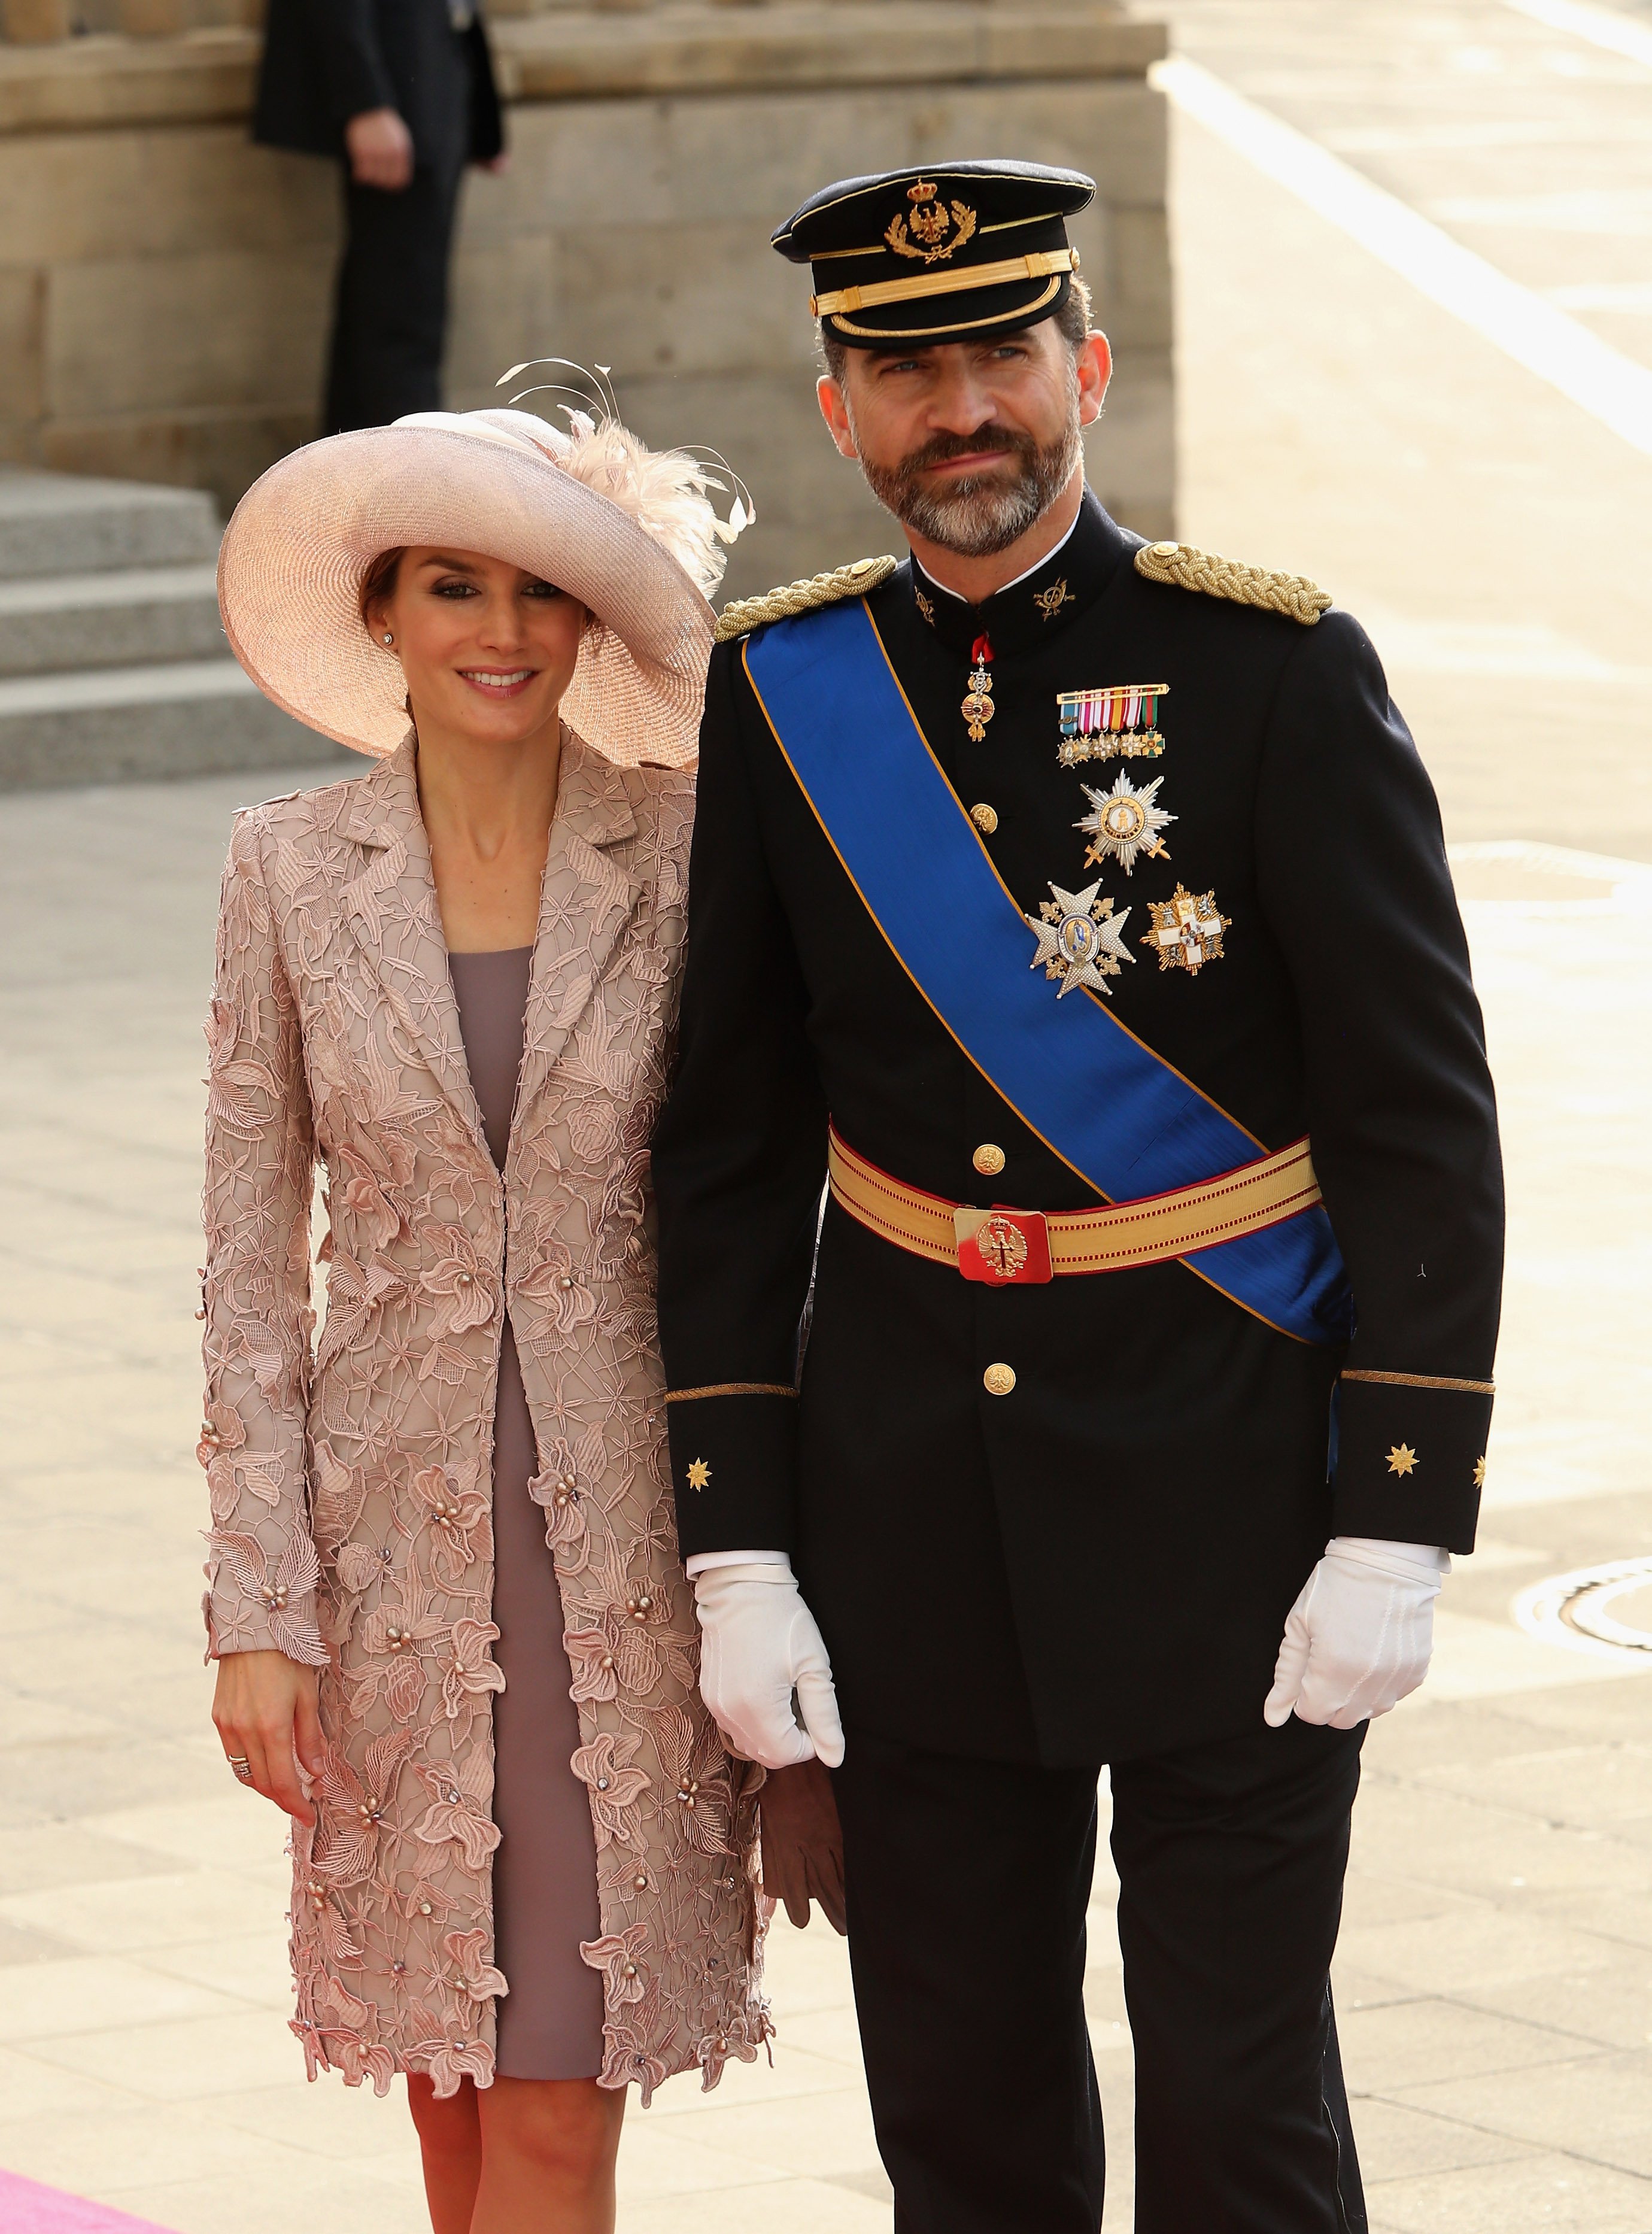 Princess Letizia of Spain and Prince Felipe attending the wedding ceremony of Prince Guillaume Of Luxembourg and Princess Stephanie of Luxembourg at the Cathedral of our Lady of Luxembourg on October 20, 2012 in Luxembourg, Luxembourg. / Source: Getty Images